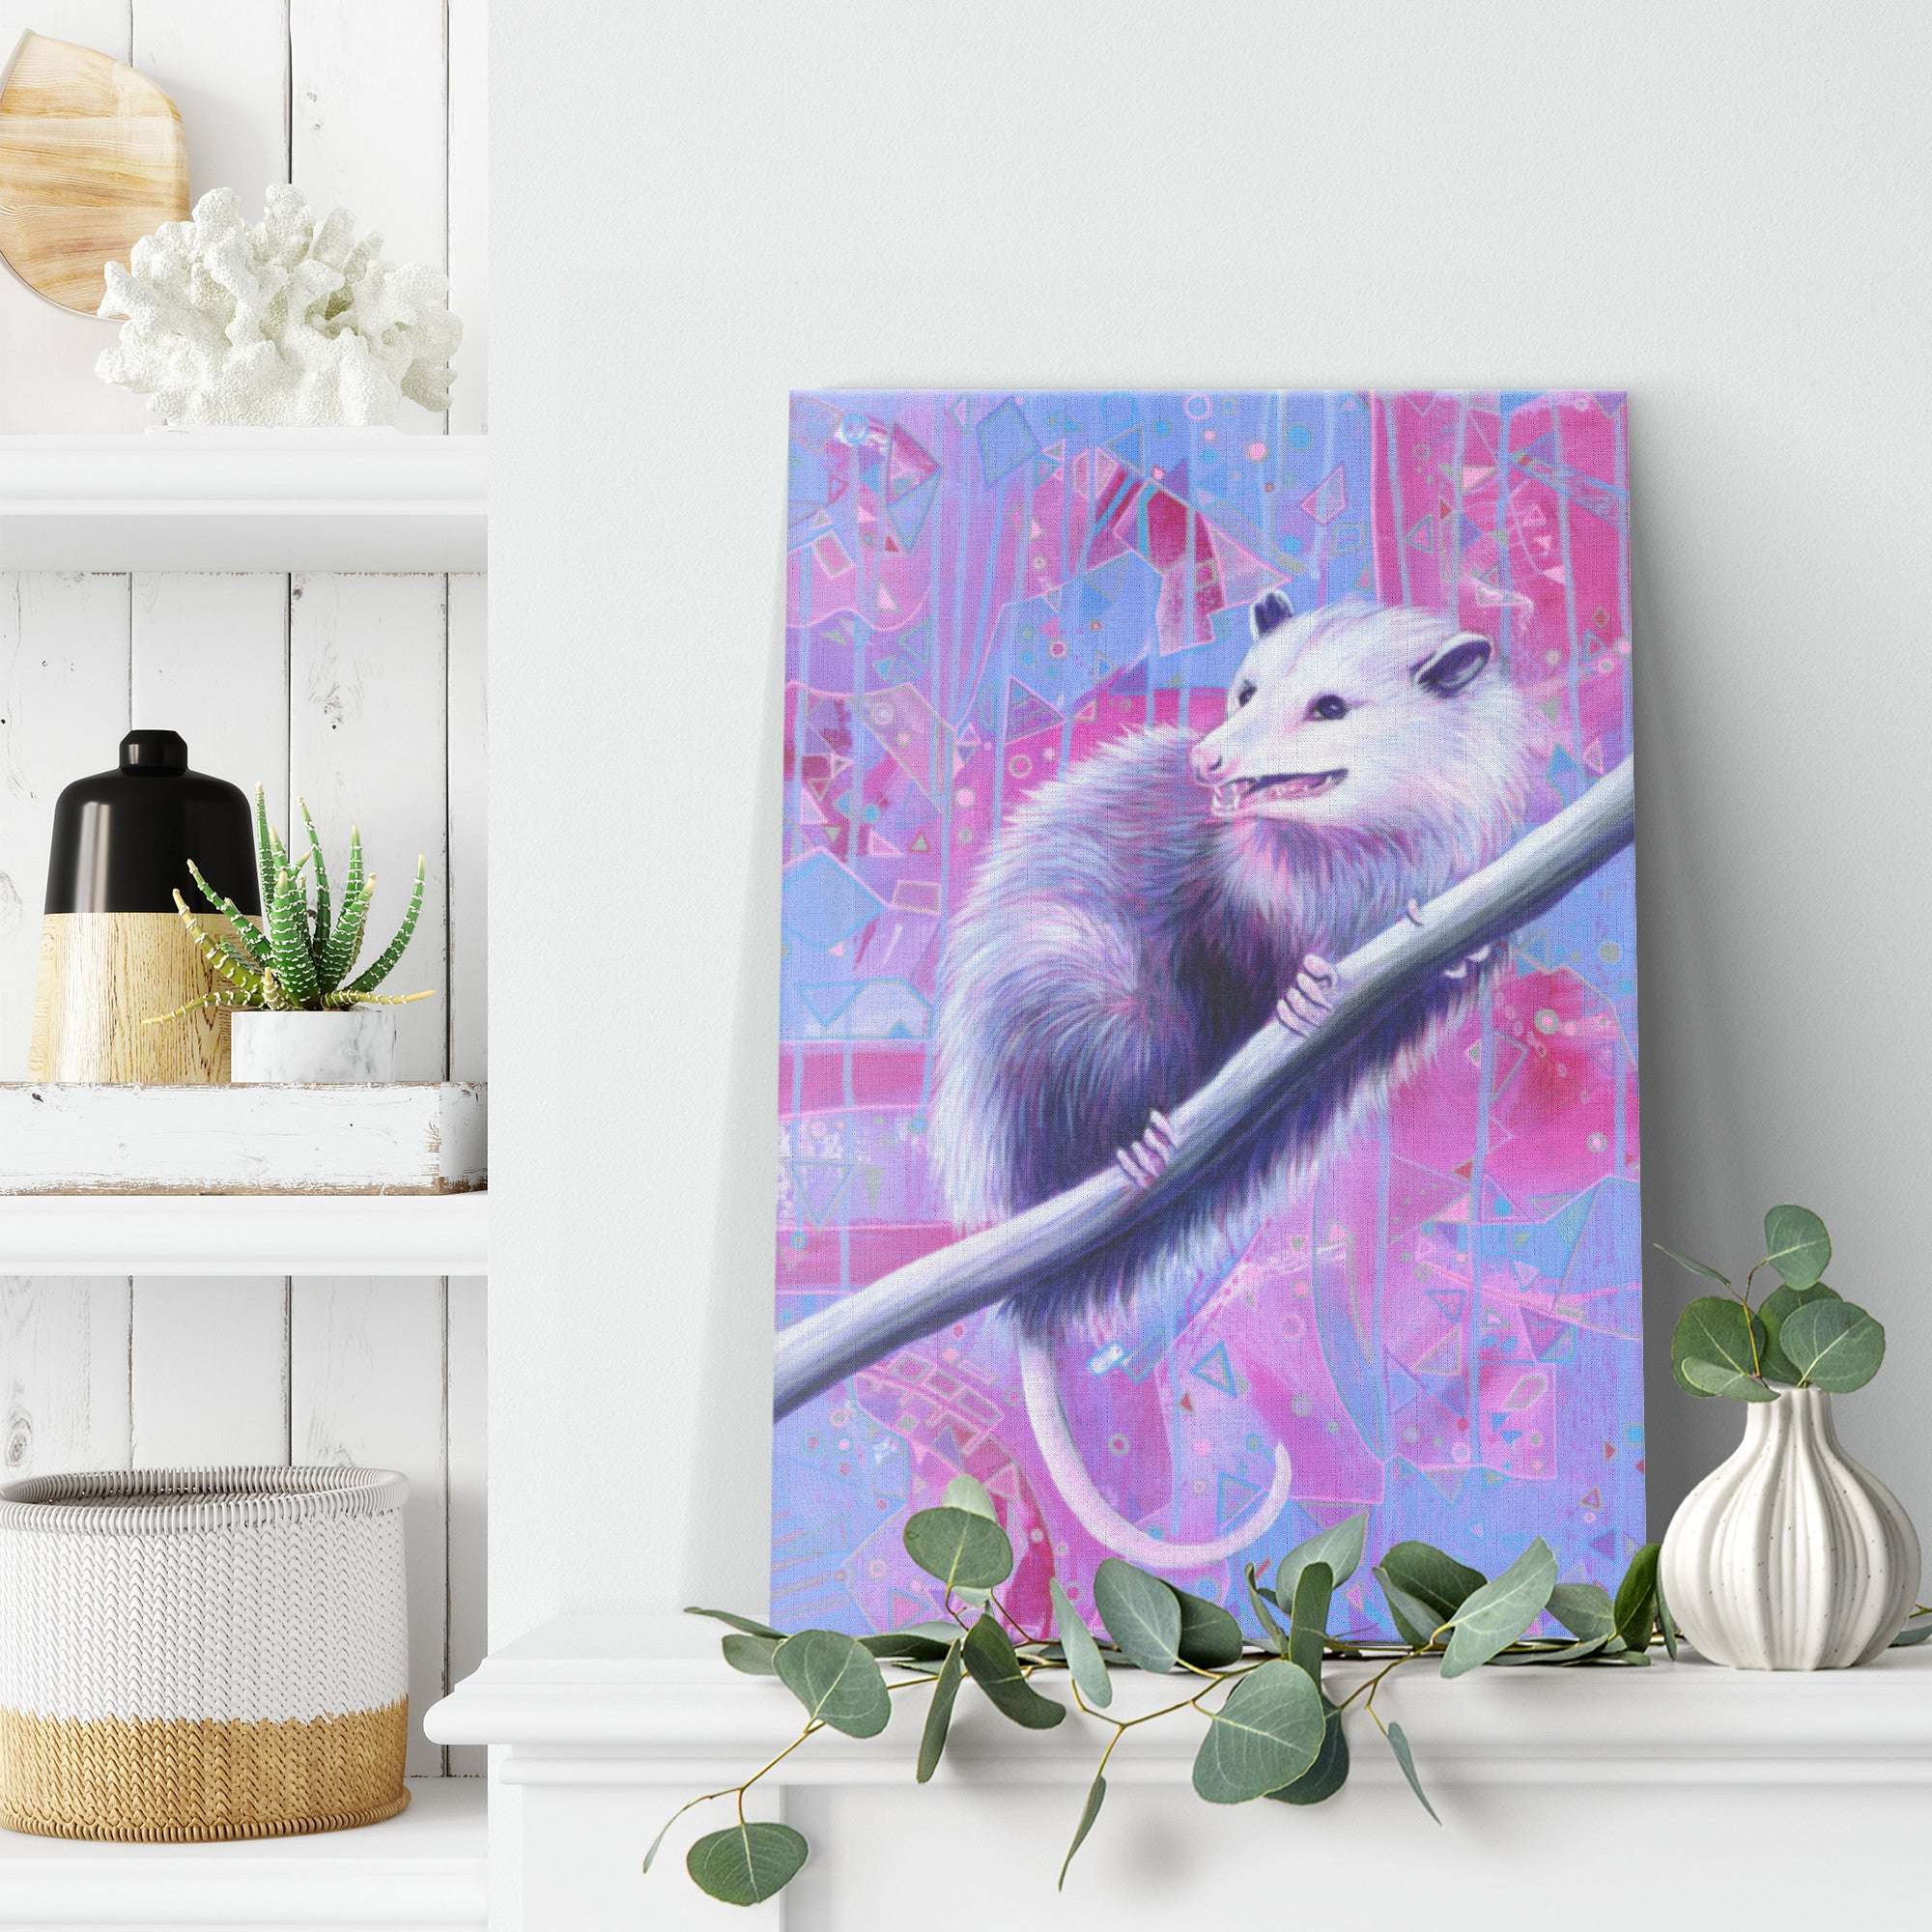 Canvas Art Print of a smiling opossum on a pink and blue abstract background, displayed on a white wall above a shelf with decorative items.